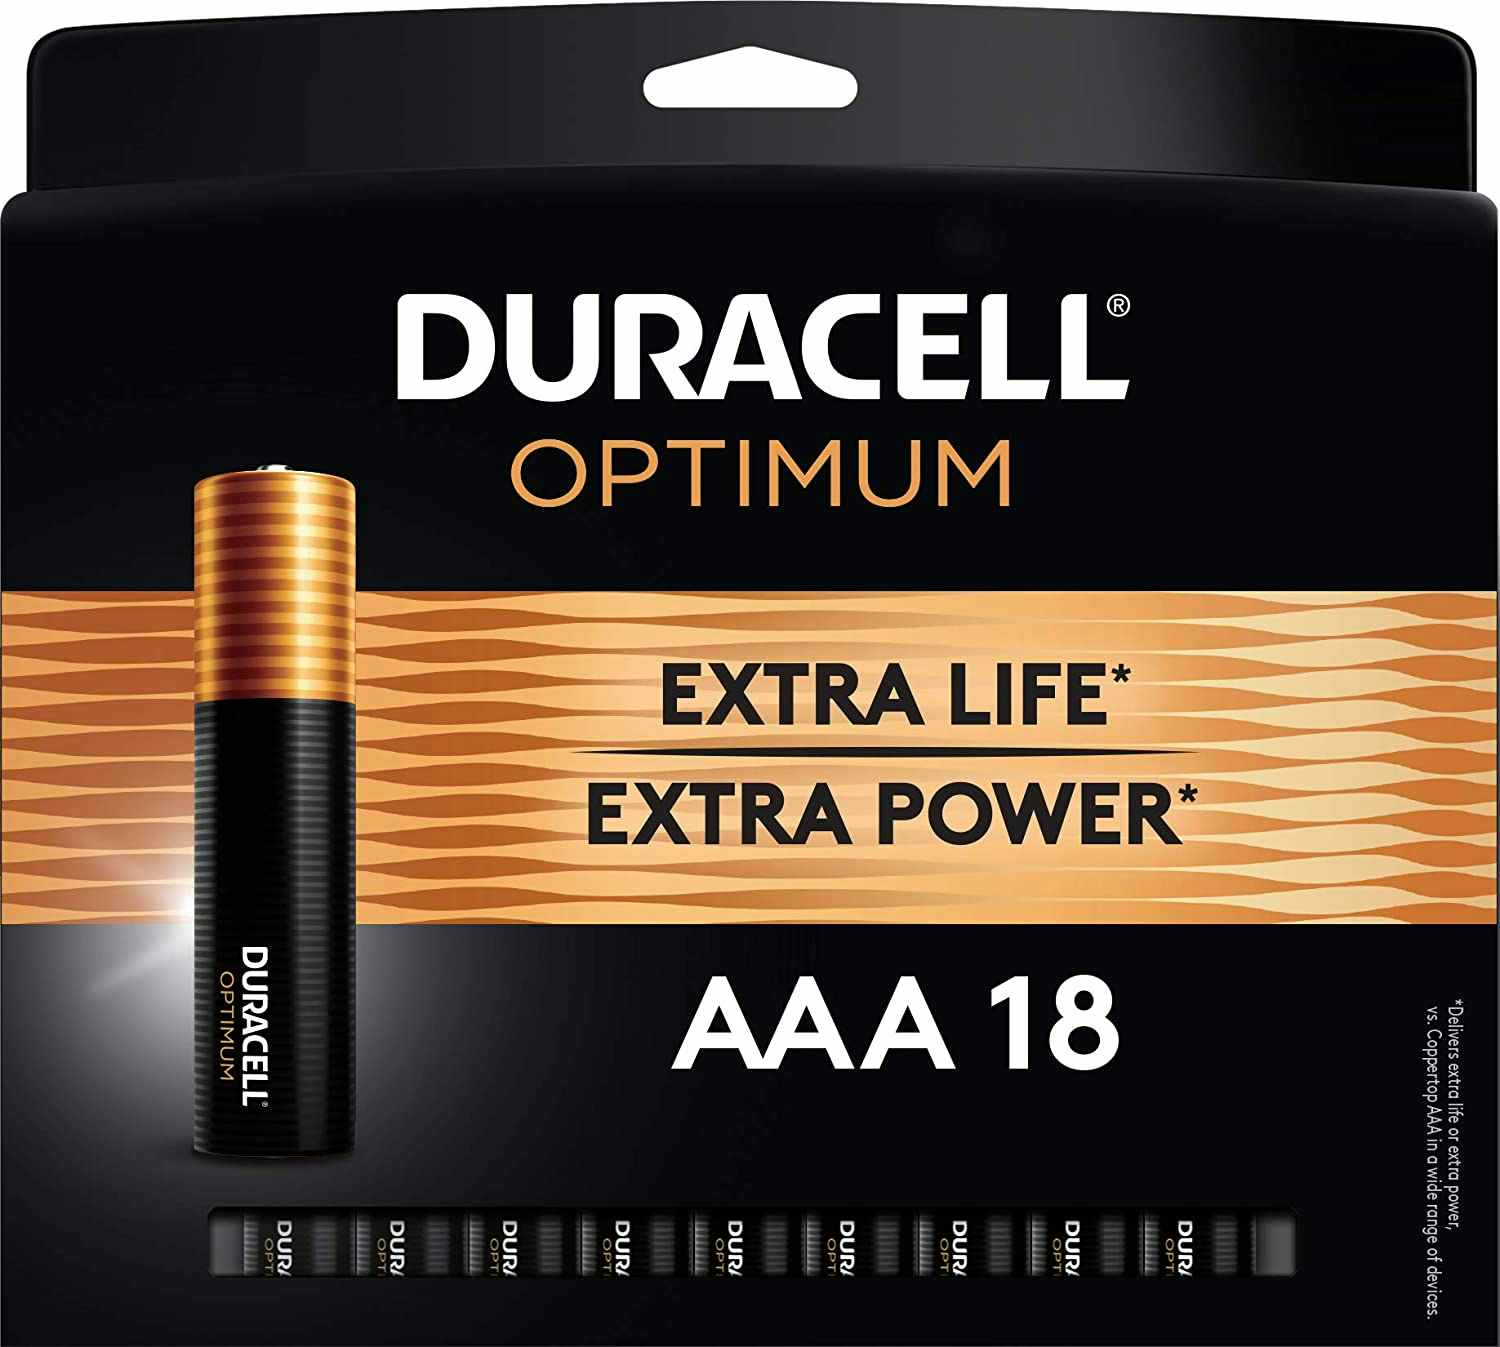 A pack of Duracell AAA batteries